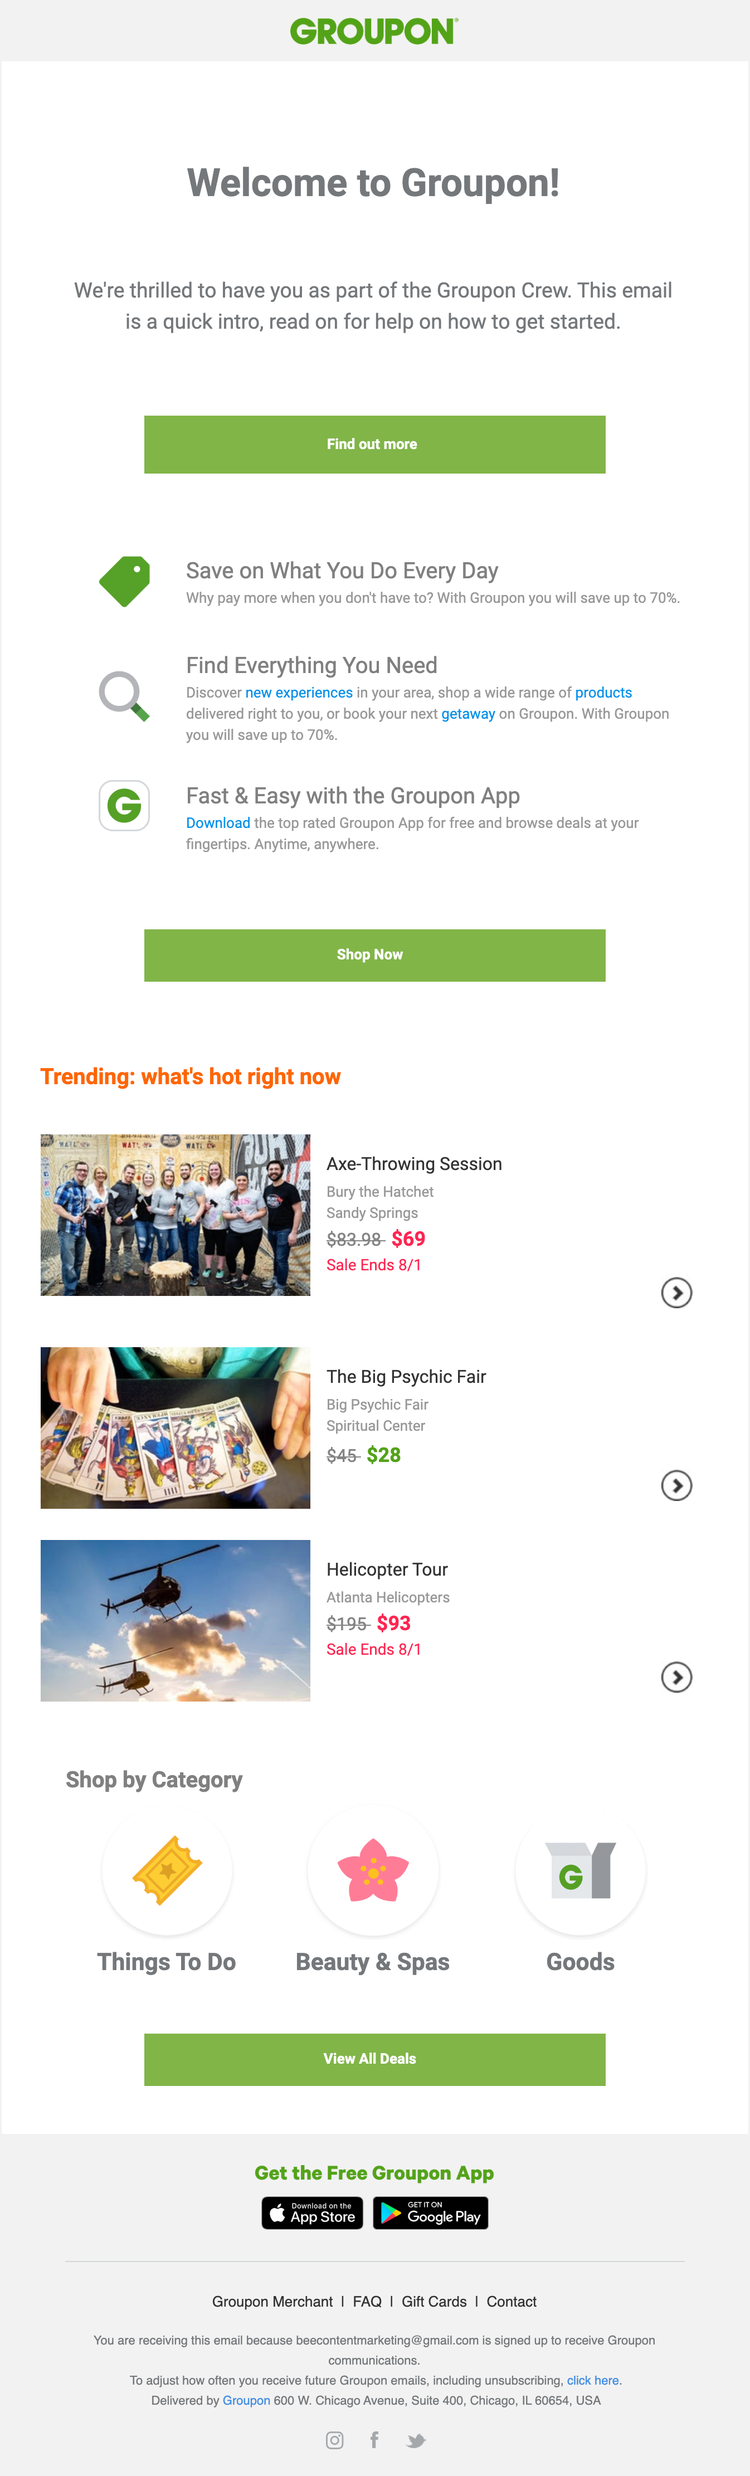 Groupon's welcome email